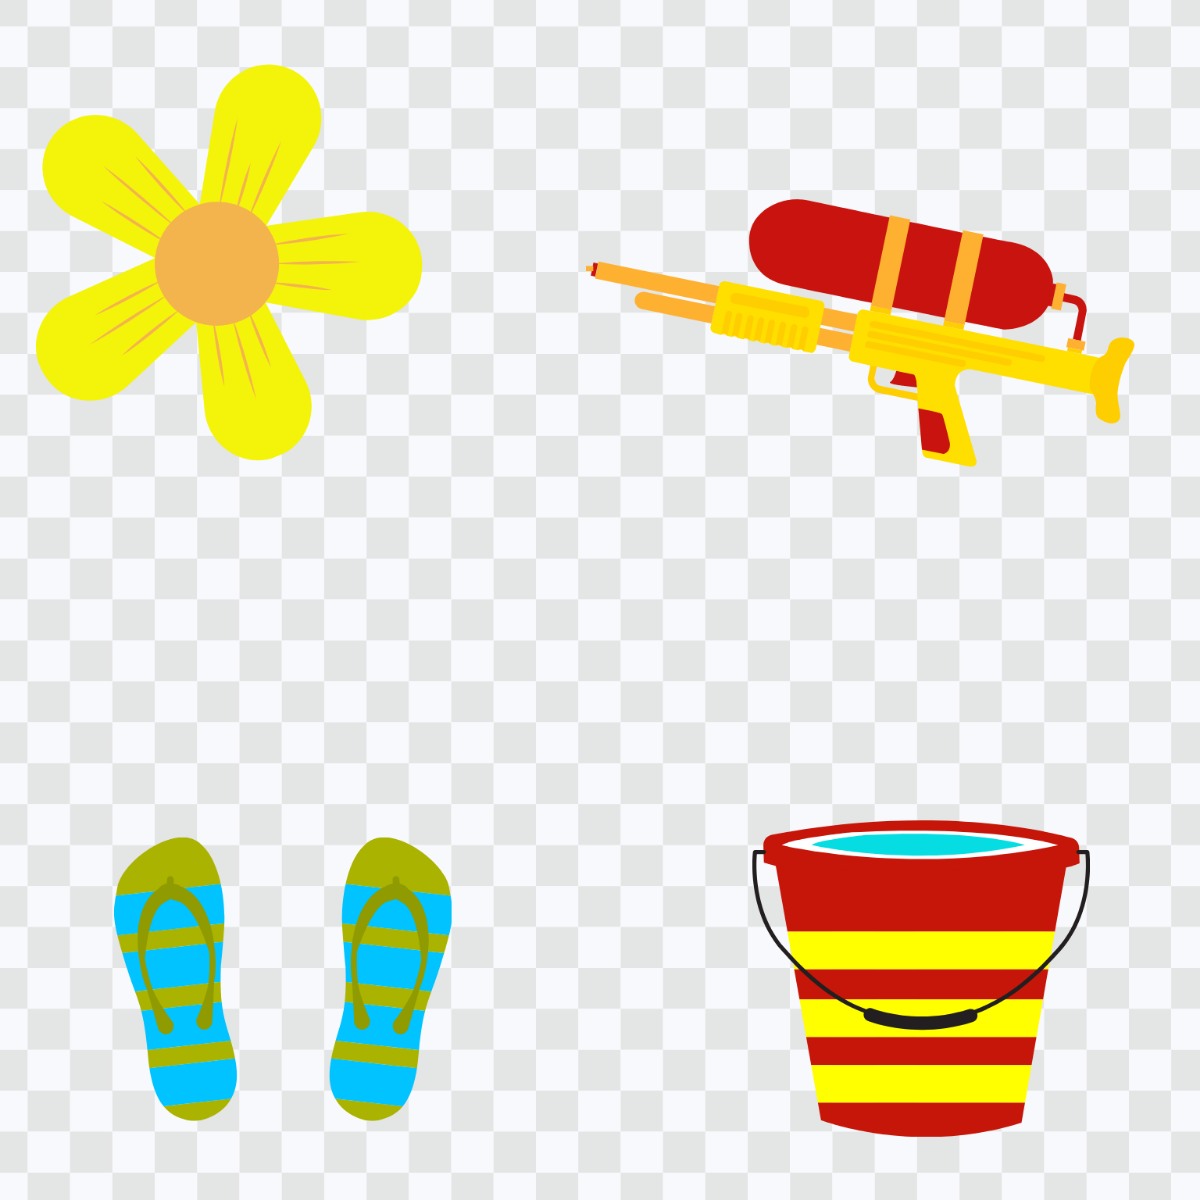 Free Songkran Icons Template